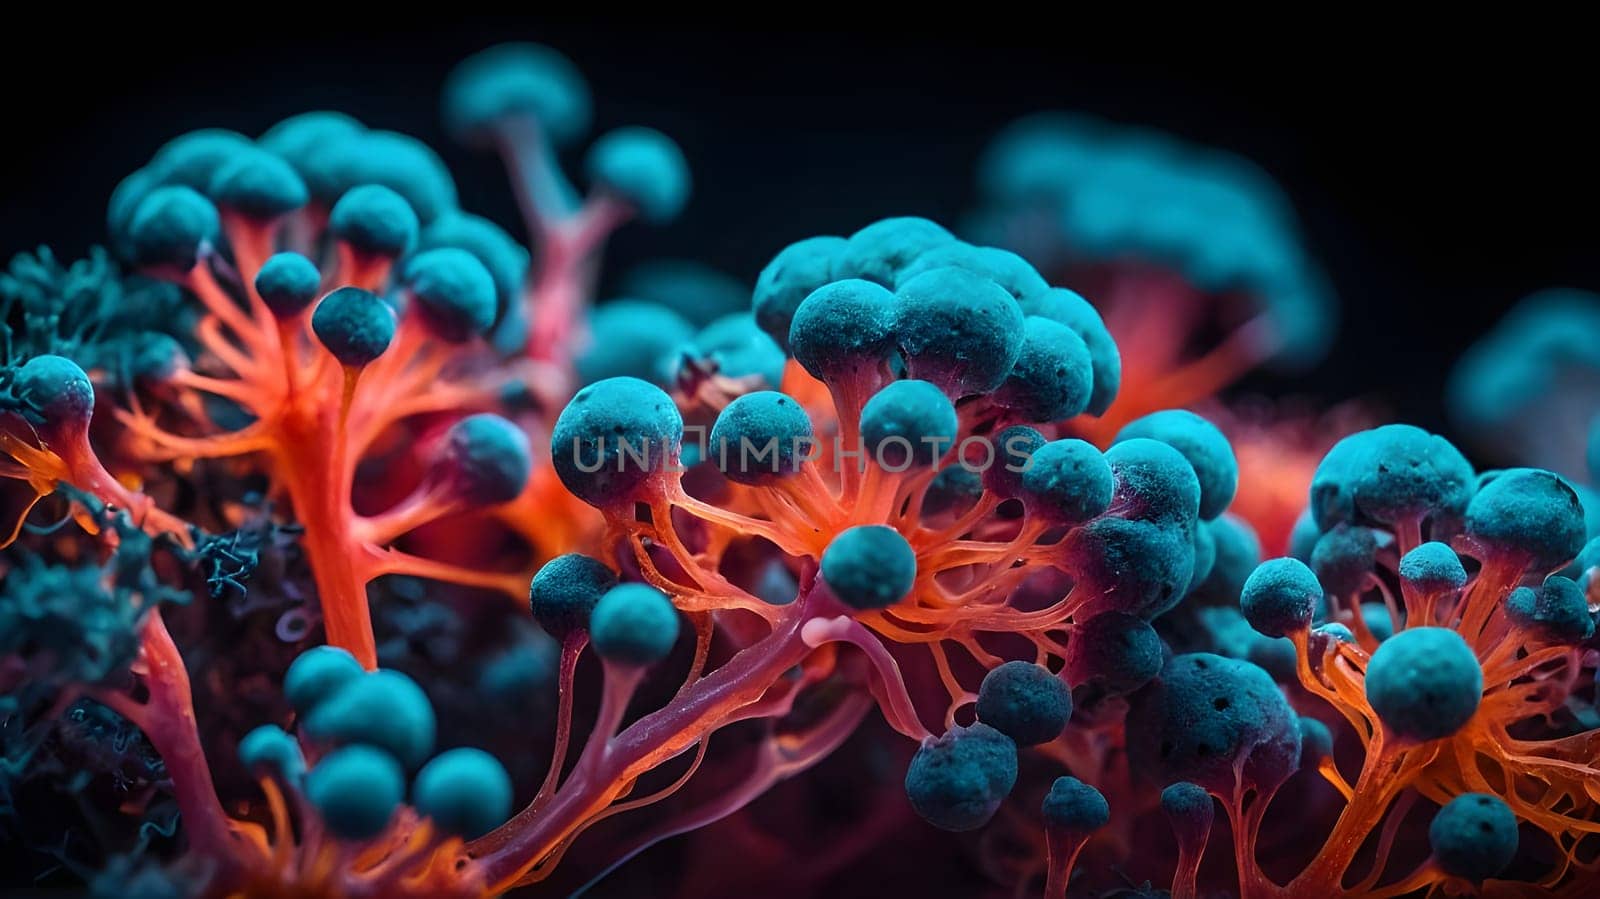 Molecules of Candida auris fungal infection in darkness,neon art. by andre_dechapelle